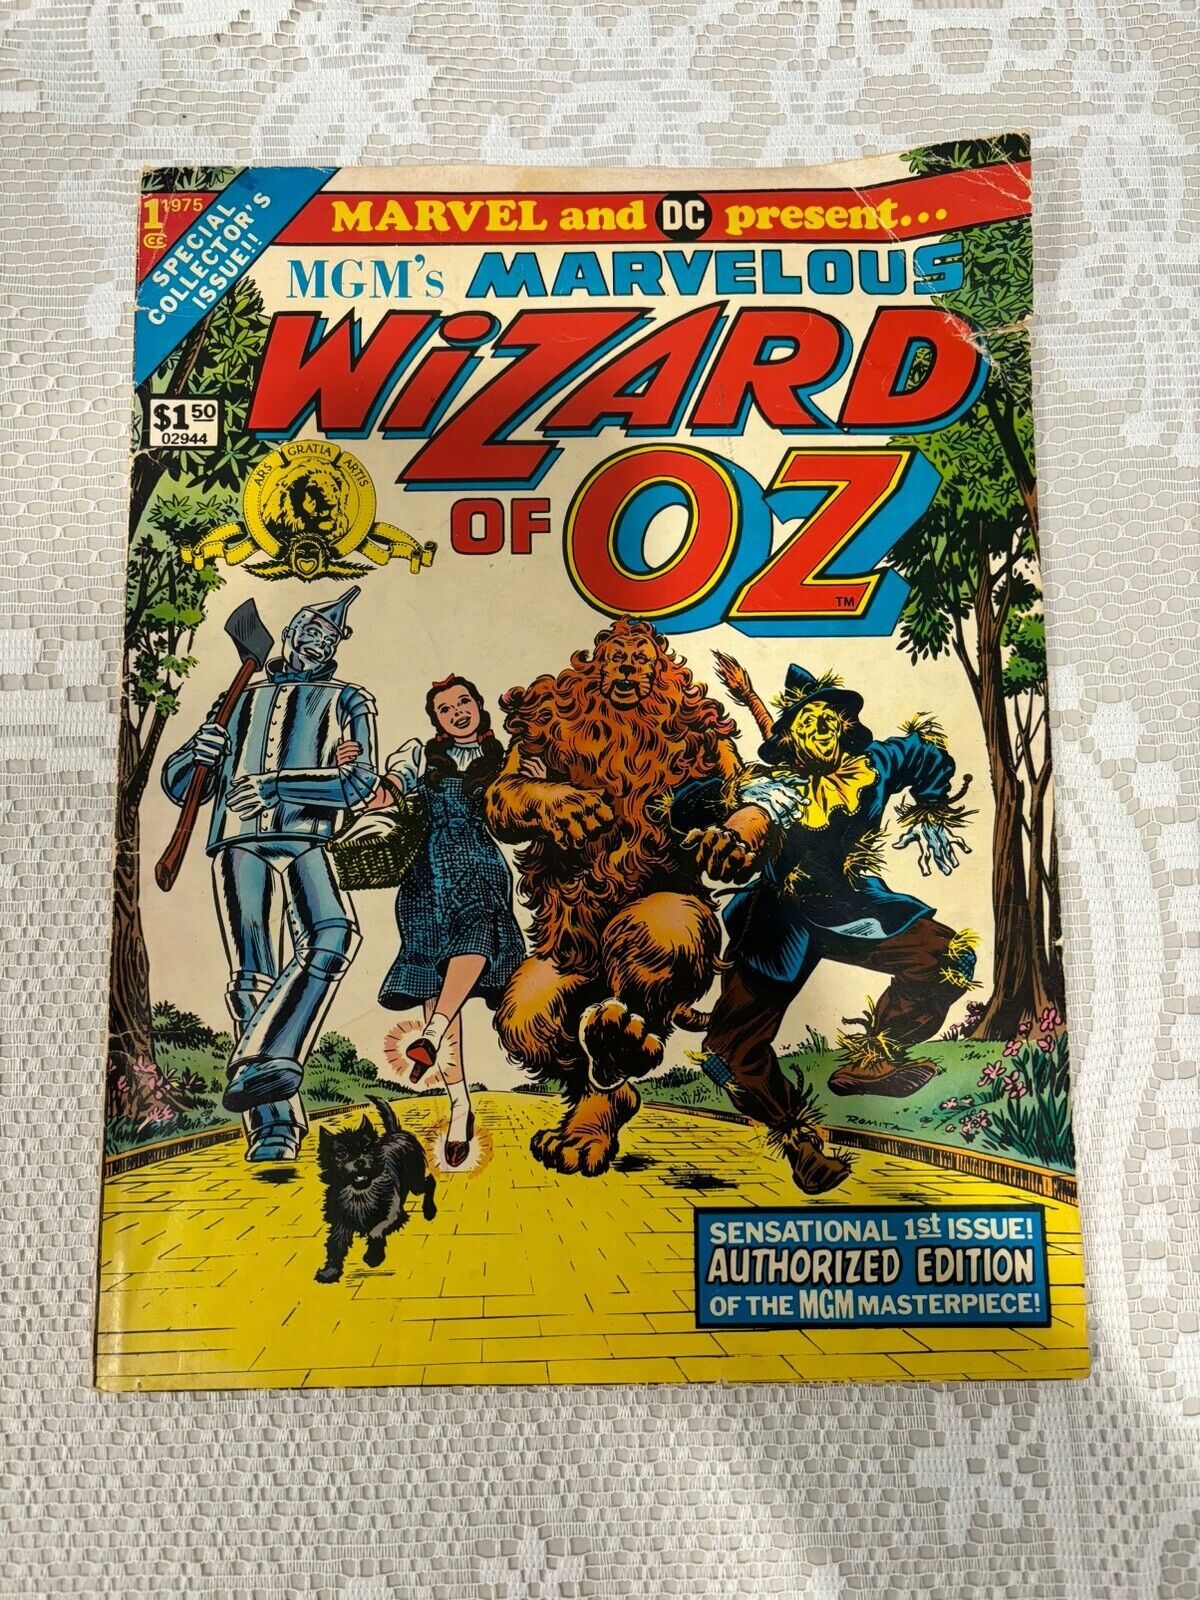 MARVEL AND DC PRESENT MGM’S MARVELOUS WIZARD OF OZ Special Collector’s Edition